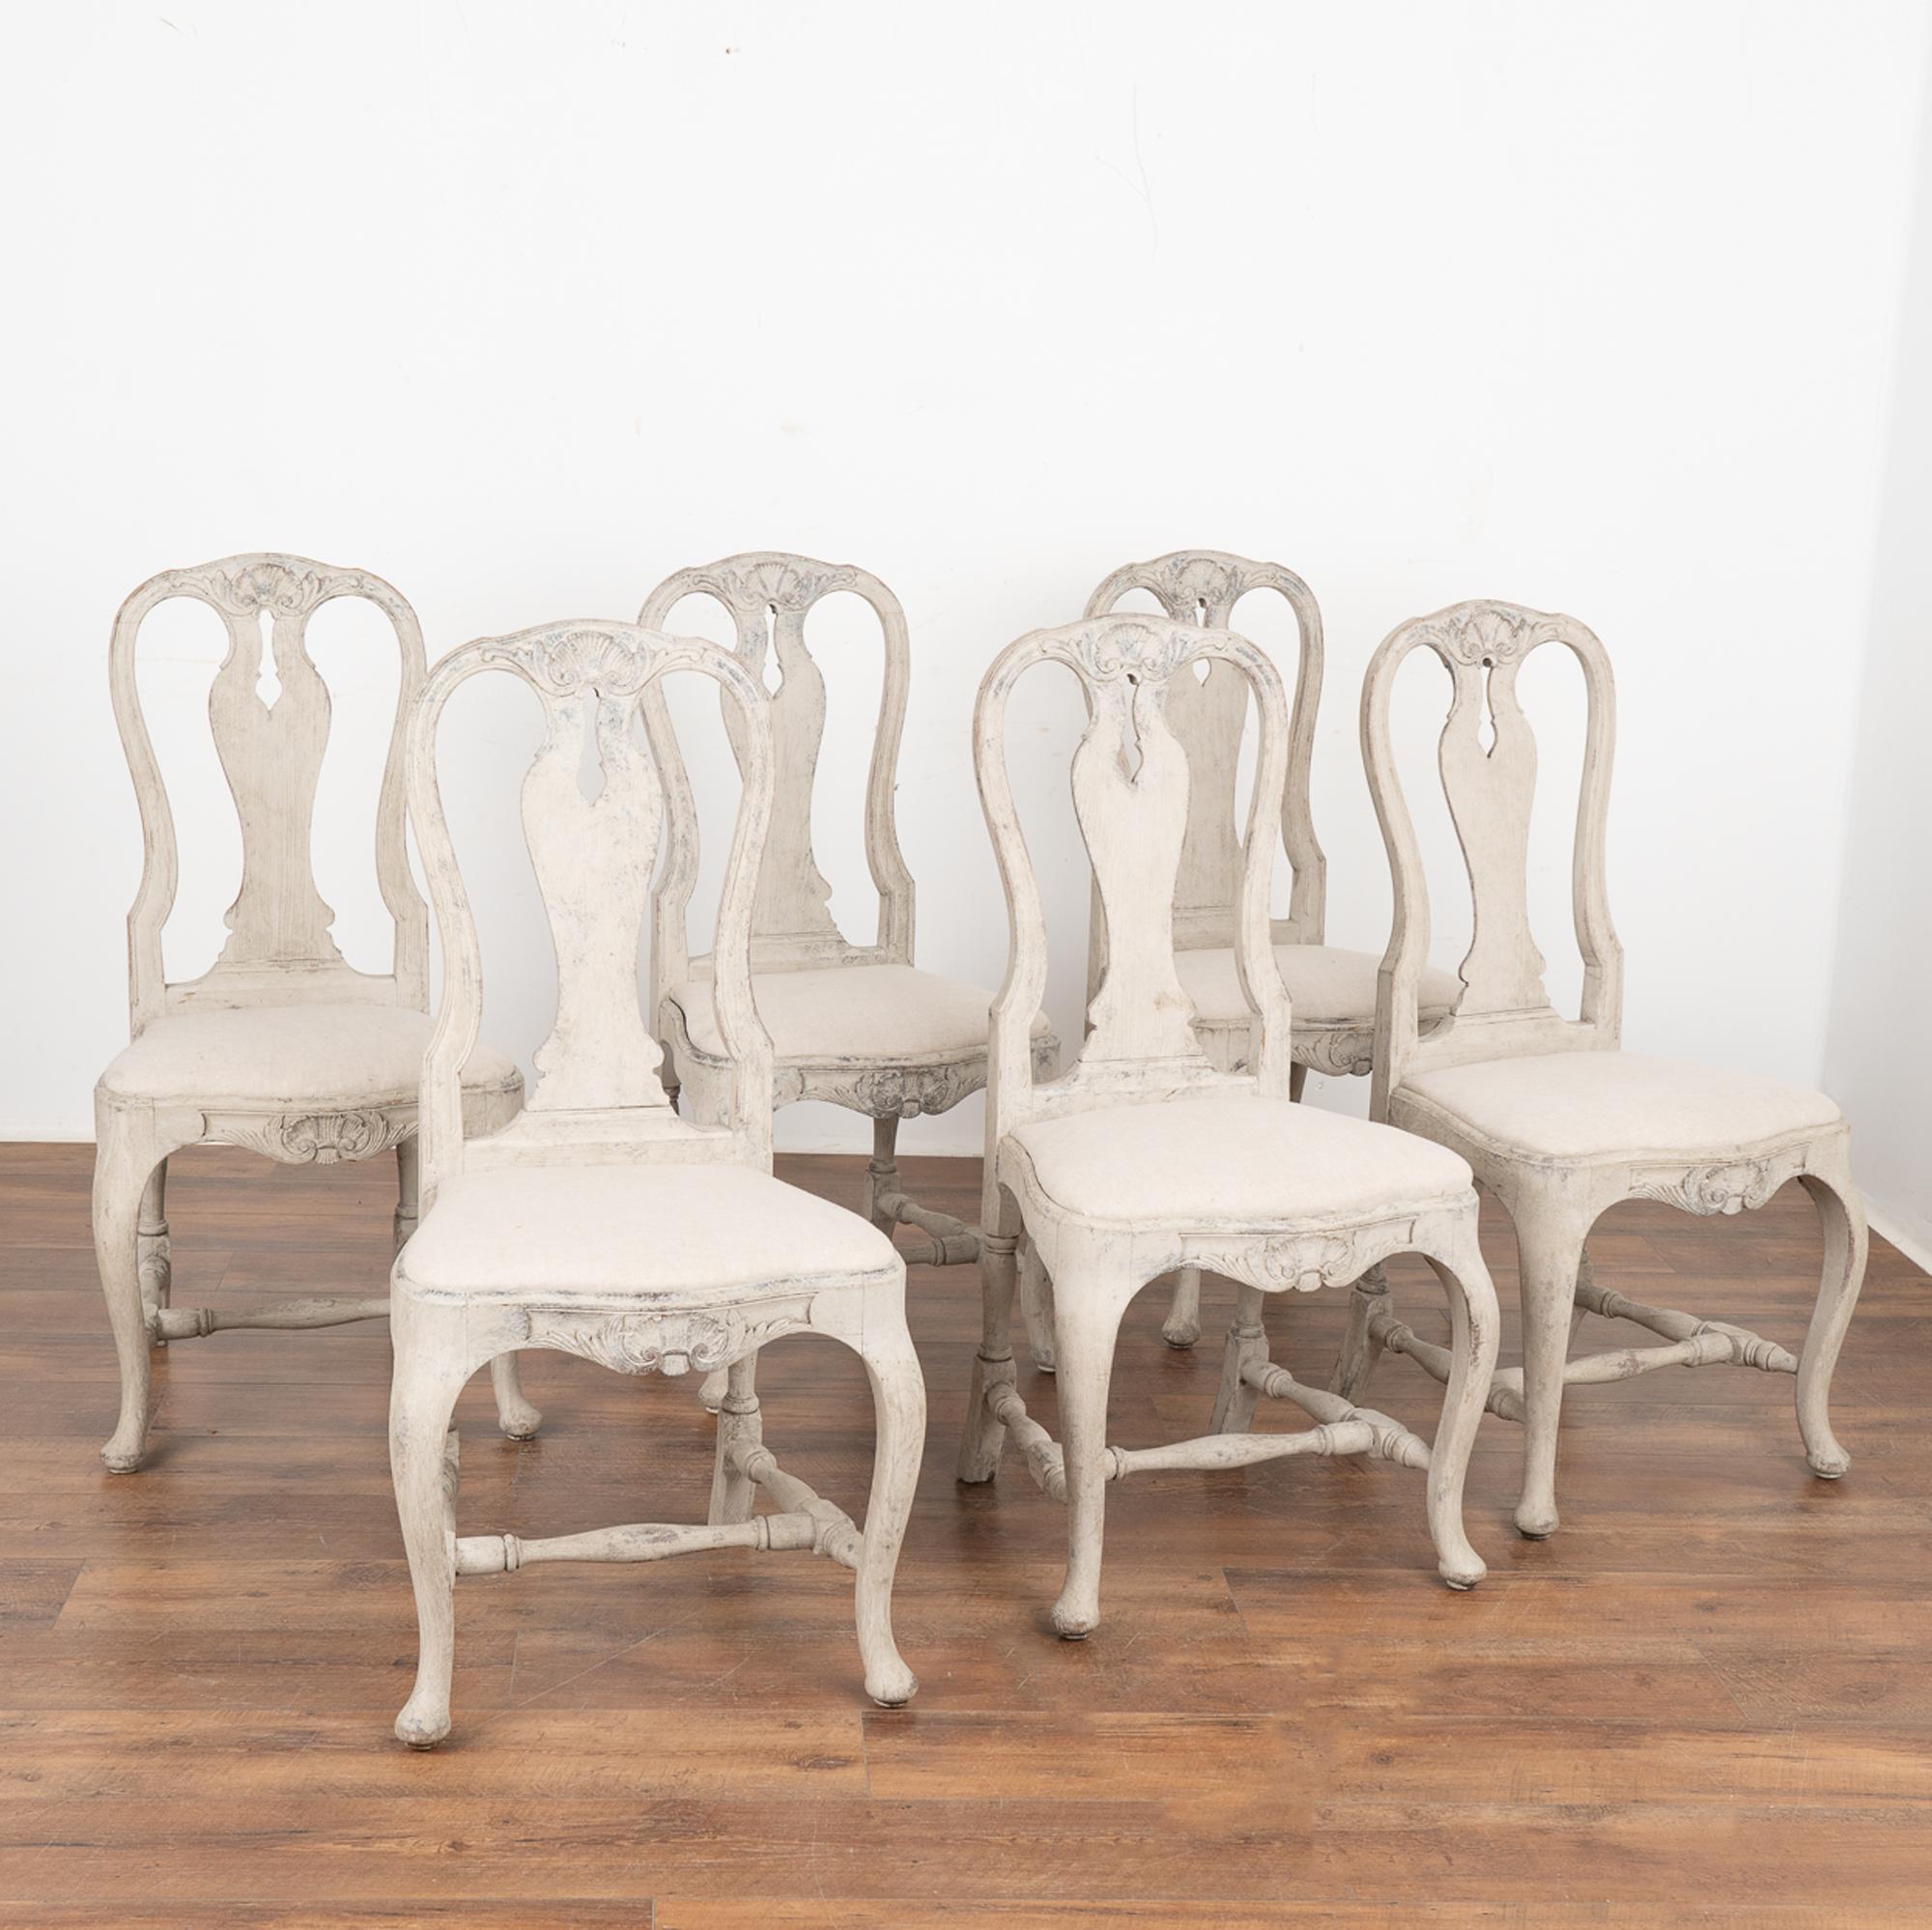 Set of 6 lovely Swedish rococo dining chairs with curved cabriolet legs and carved accents. 
Newer professionally applied layered gray painted finish has been lightly rubbed and perfectly distressed to fit the age and grace of these chairs.